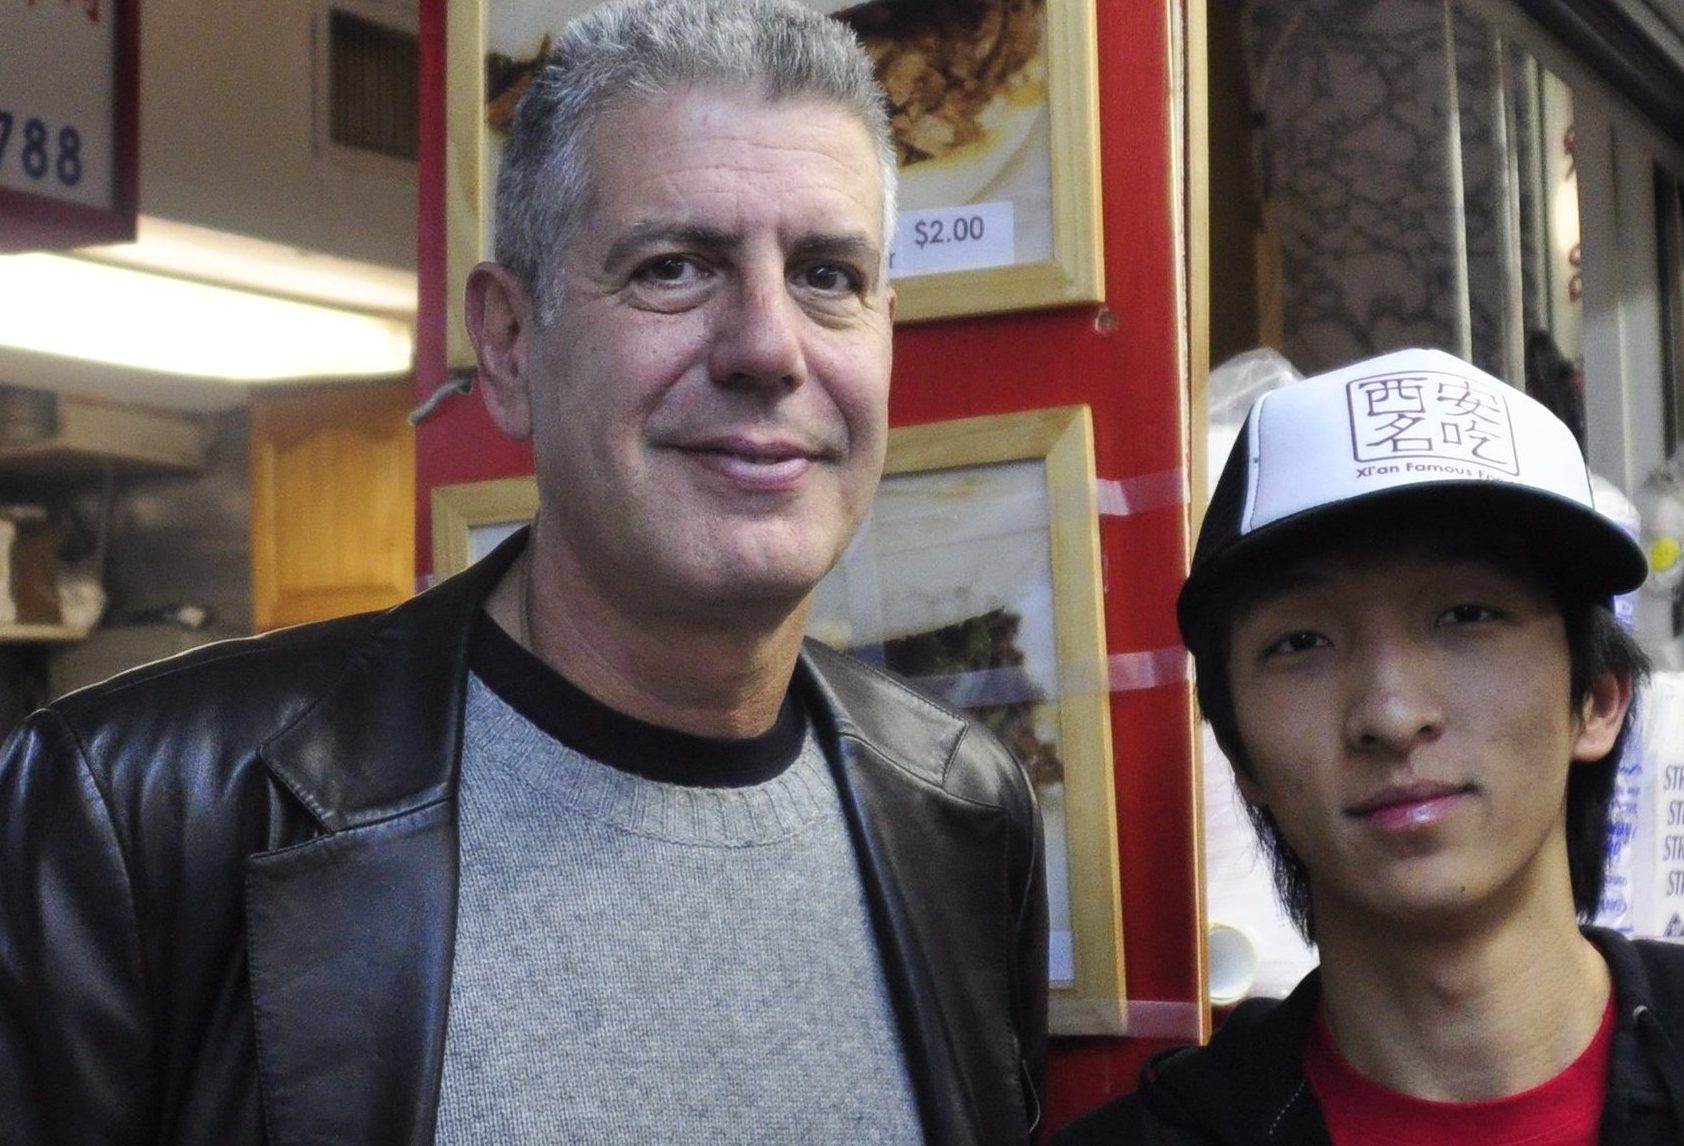 Restaurant Featured On ‘No Reservations’ To Donate $60k To Suicide Prevention